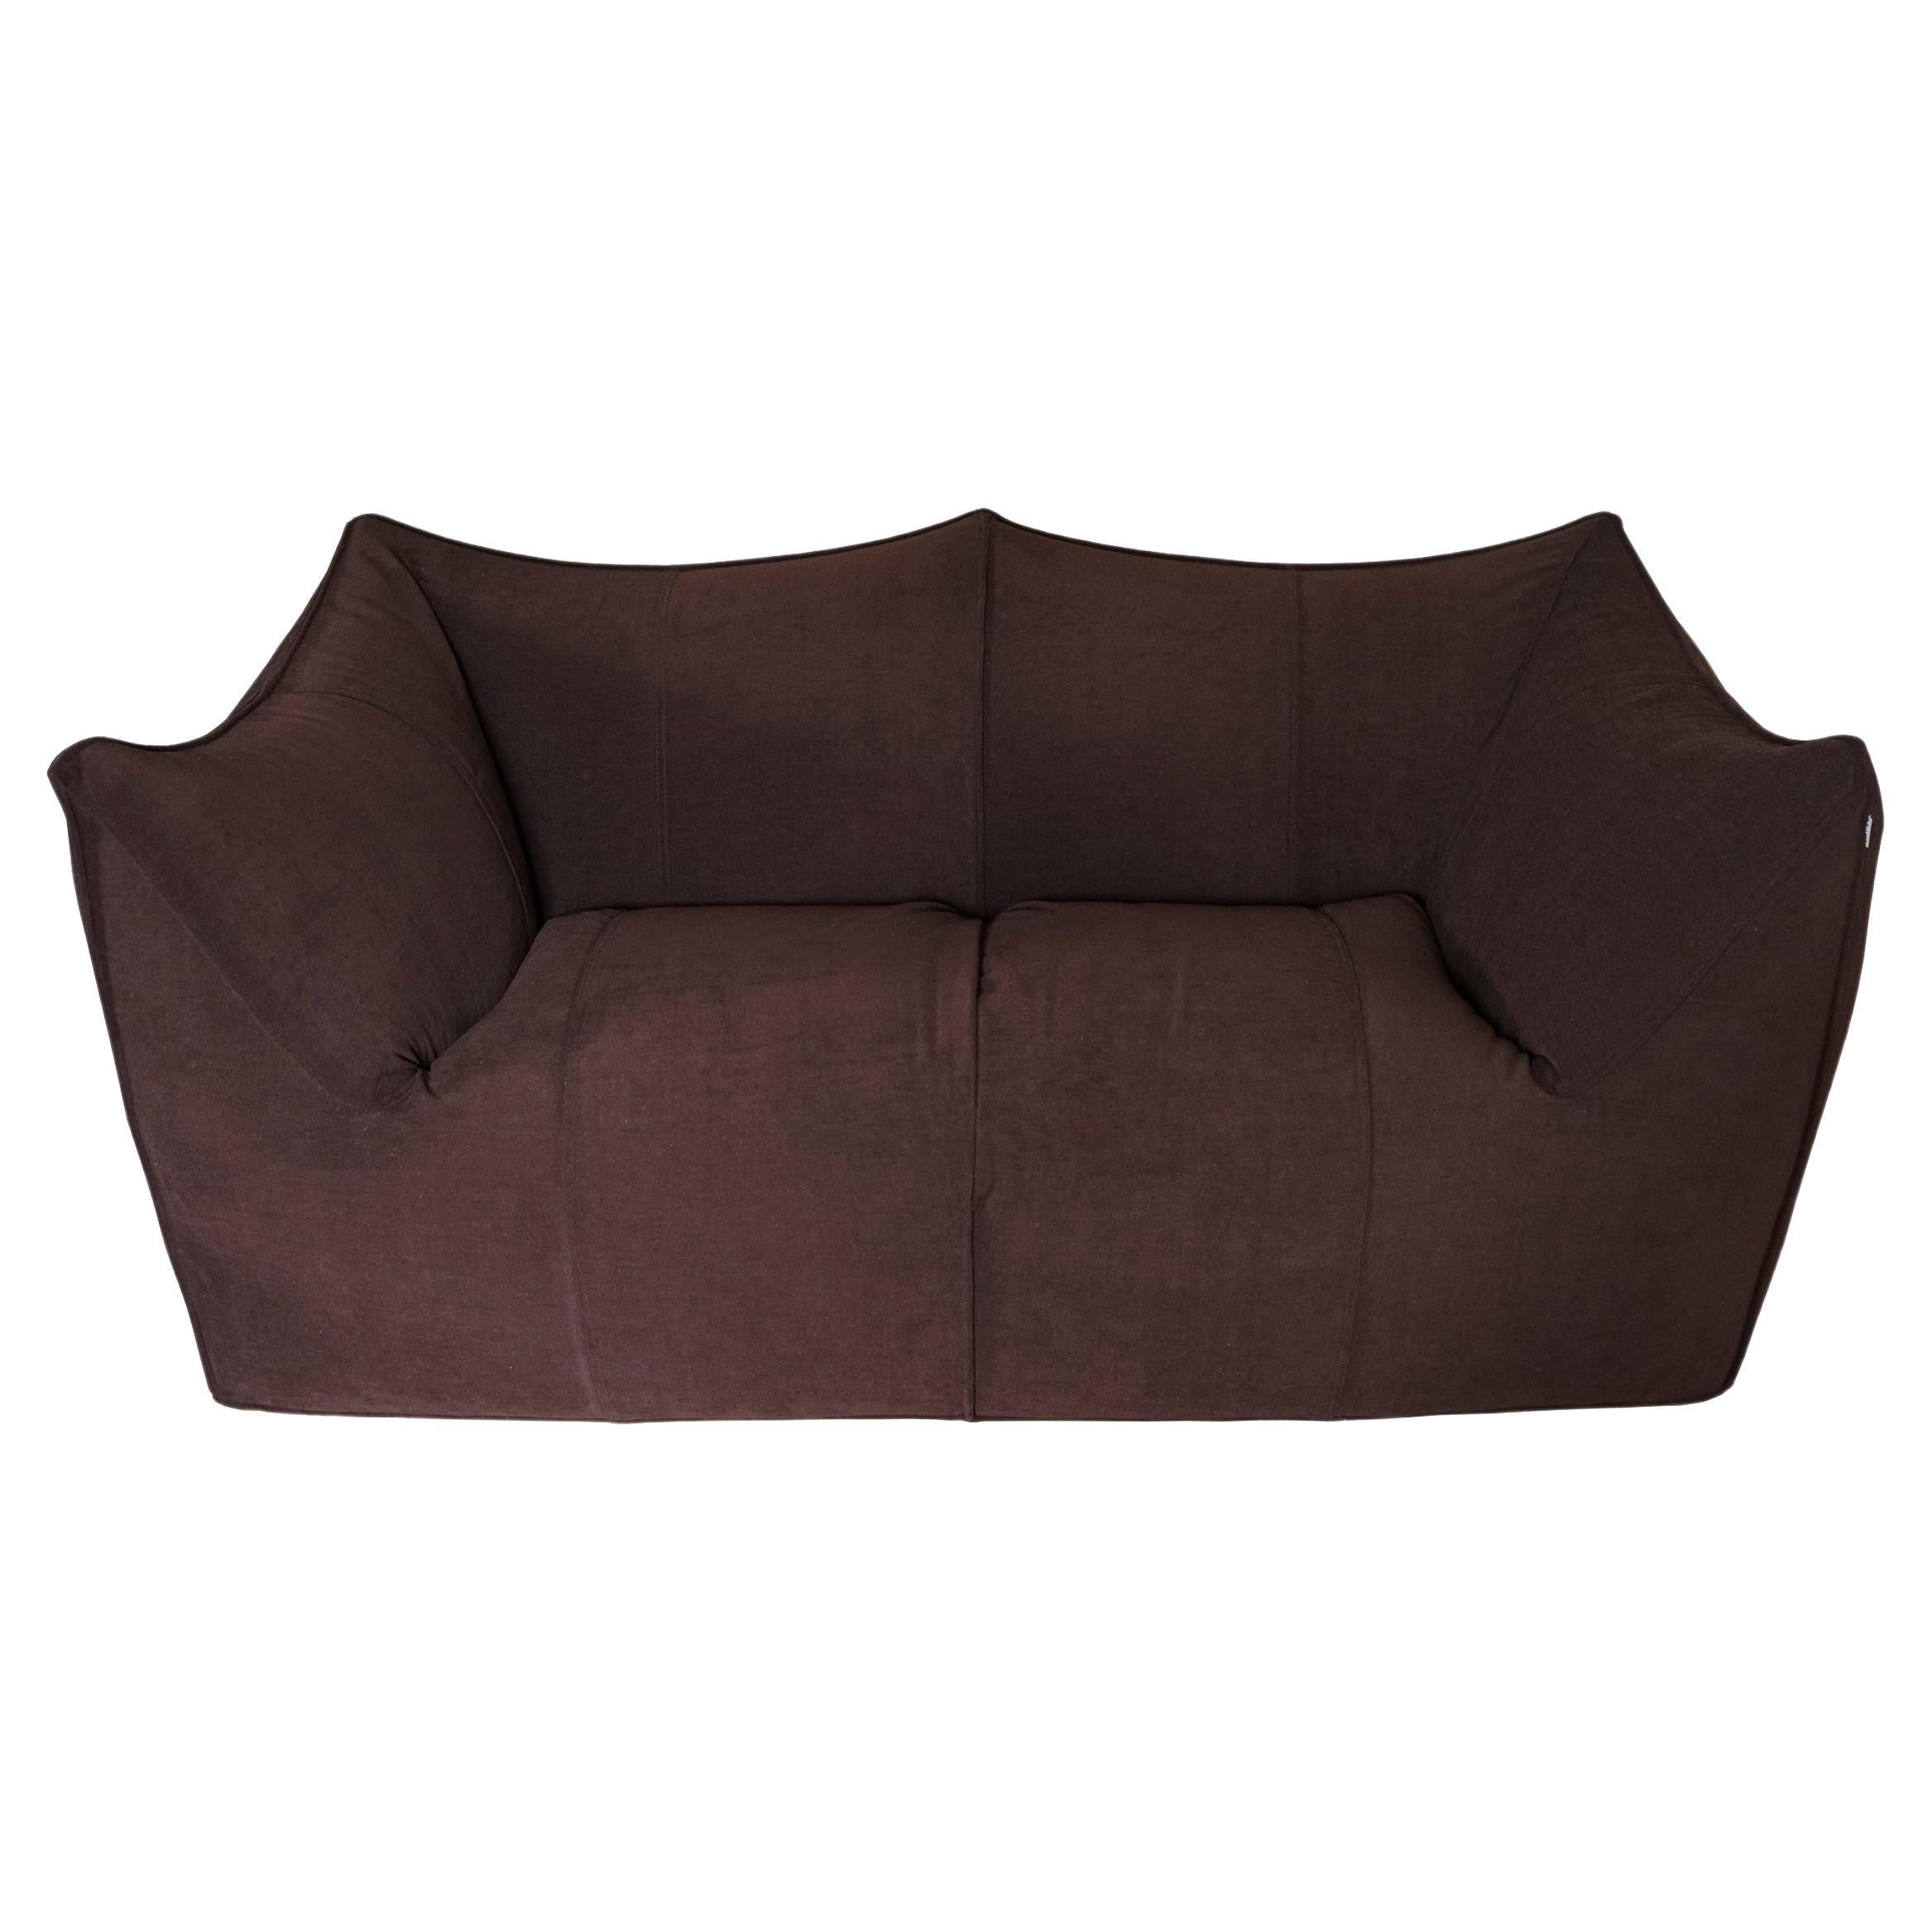 Mario Bellini

Le Bambole

A round shape two-seater sofa reupholstered with a brown colored short velvet, the internal foam supported with a metal structure. 
Produced by B&B Italia.
Label on the canvas.
Circa 1973.